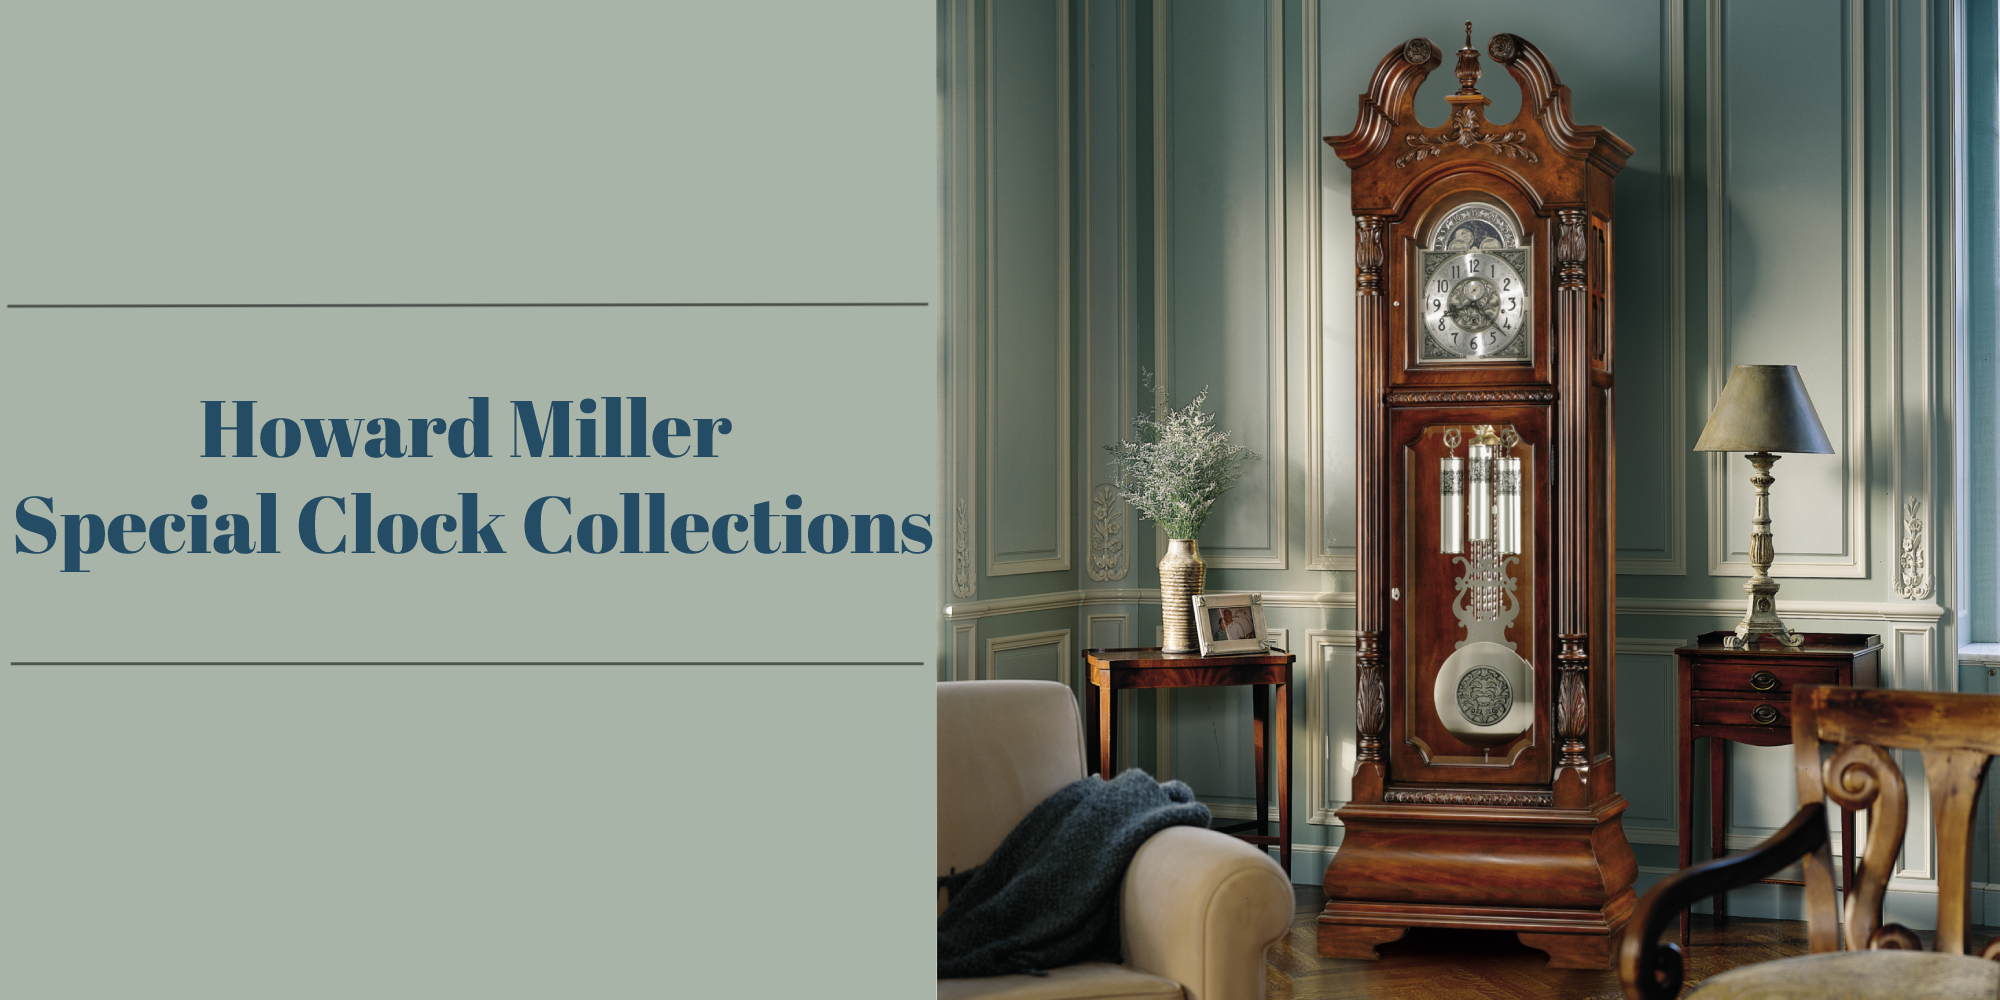 Howard Miller Special Grandfather Clock Collections - Premier Clocks